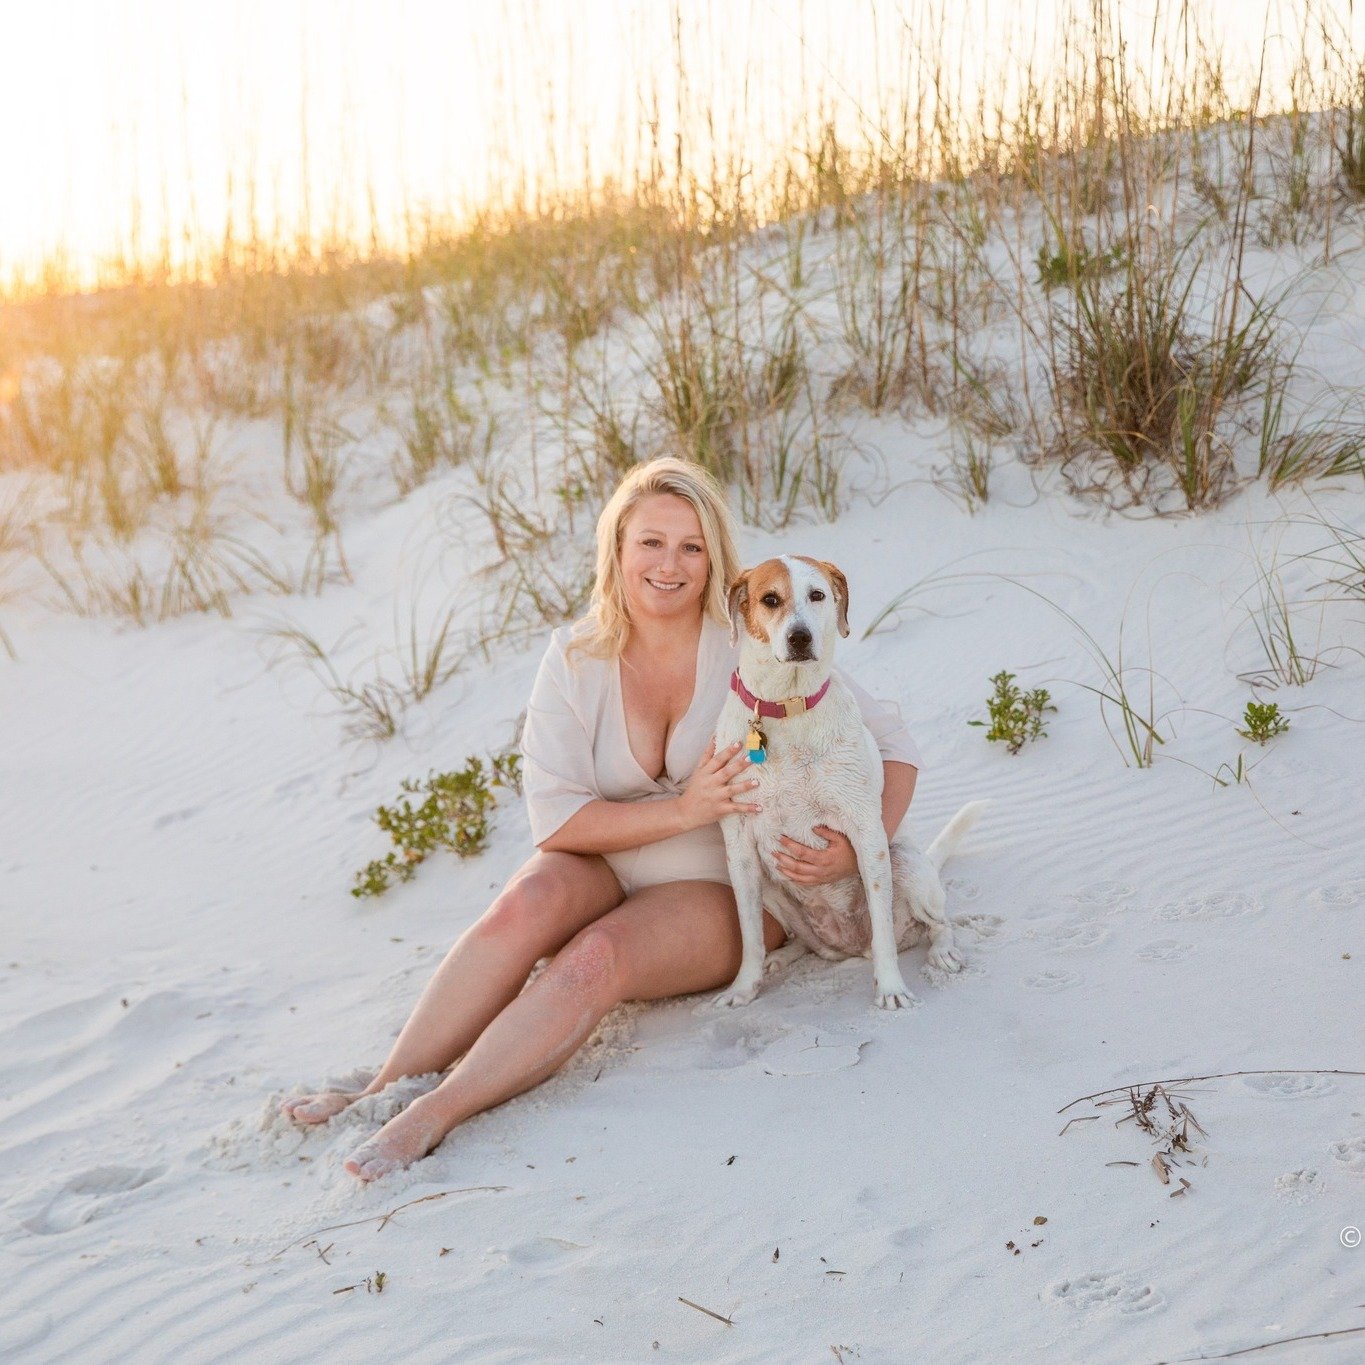 Always bring your furry friends! These pups LOVED their first time on the Gulf. 

📞Contact Jessica Salort for all your photo needs! (850)313-1586

&ldquo;Your #1 choice in all things photo!&rdquo; 📸

www.jessicasalort.com

https://www.instagram.com